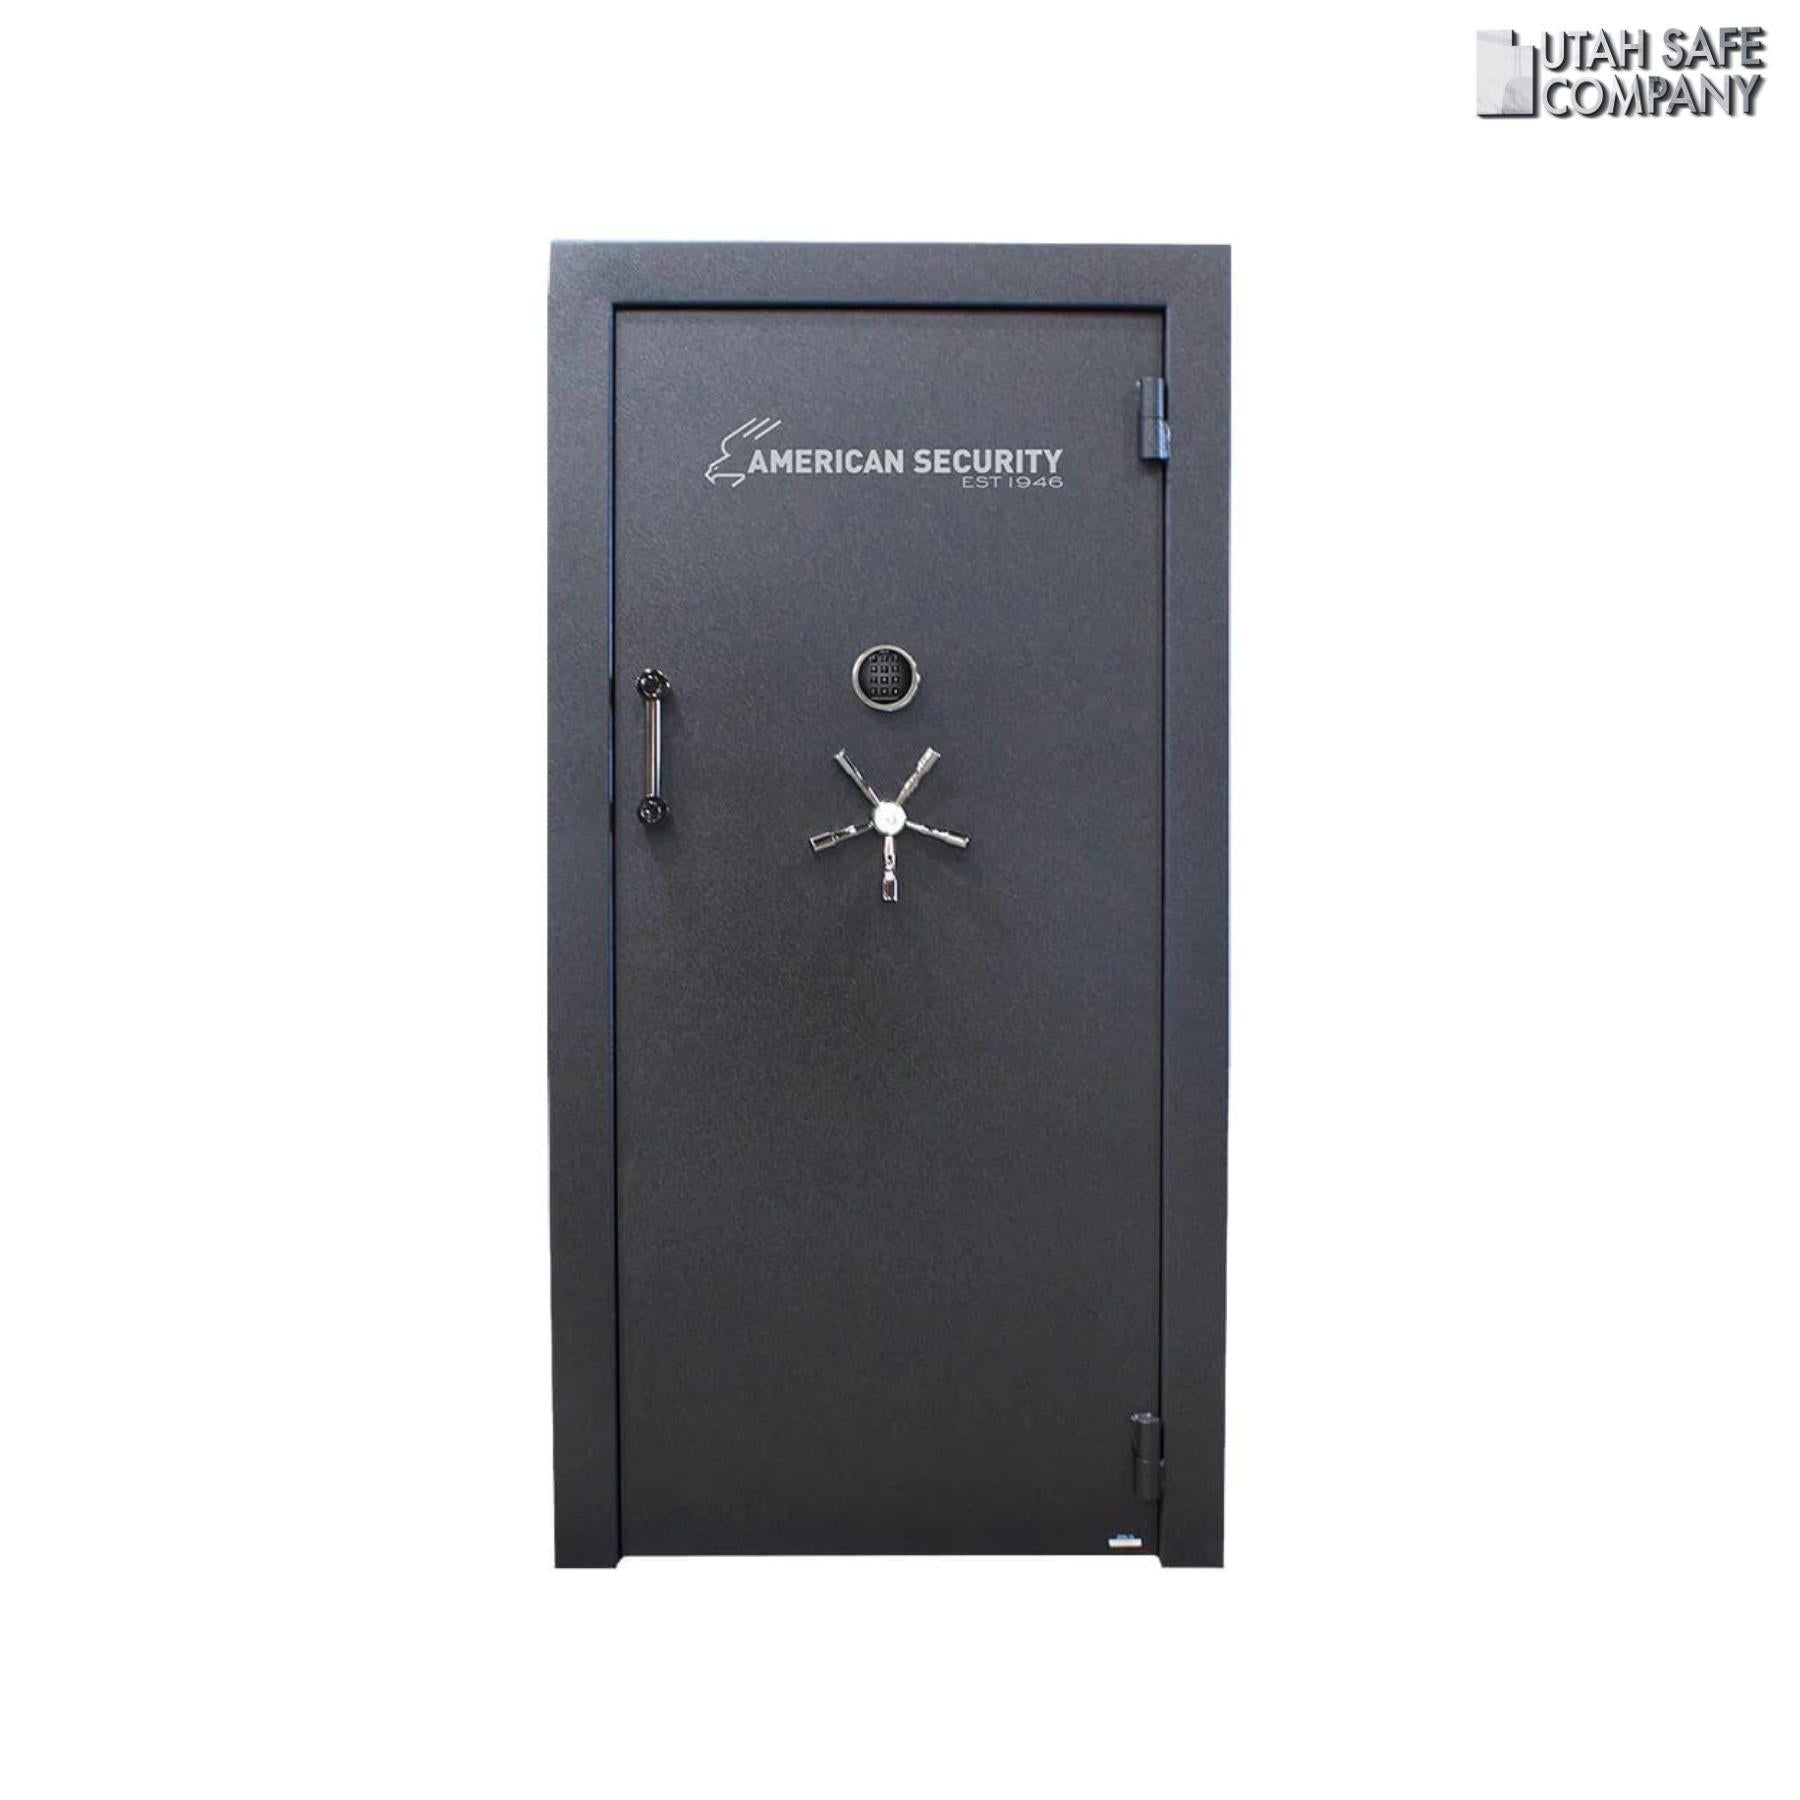 American Security VD8036BF Out-Swing Vault Door - Utah Safe Company